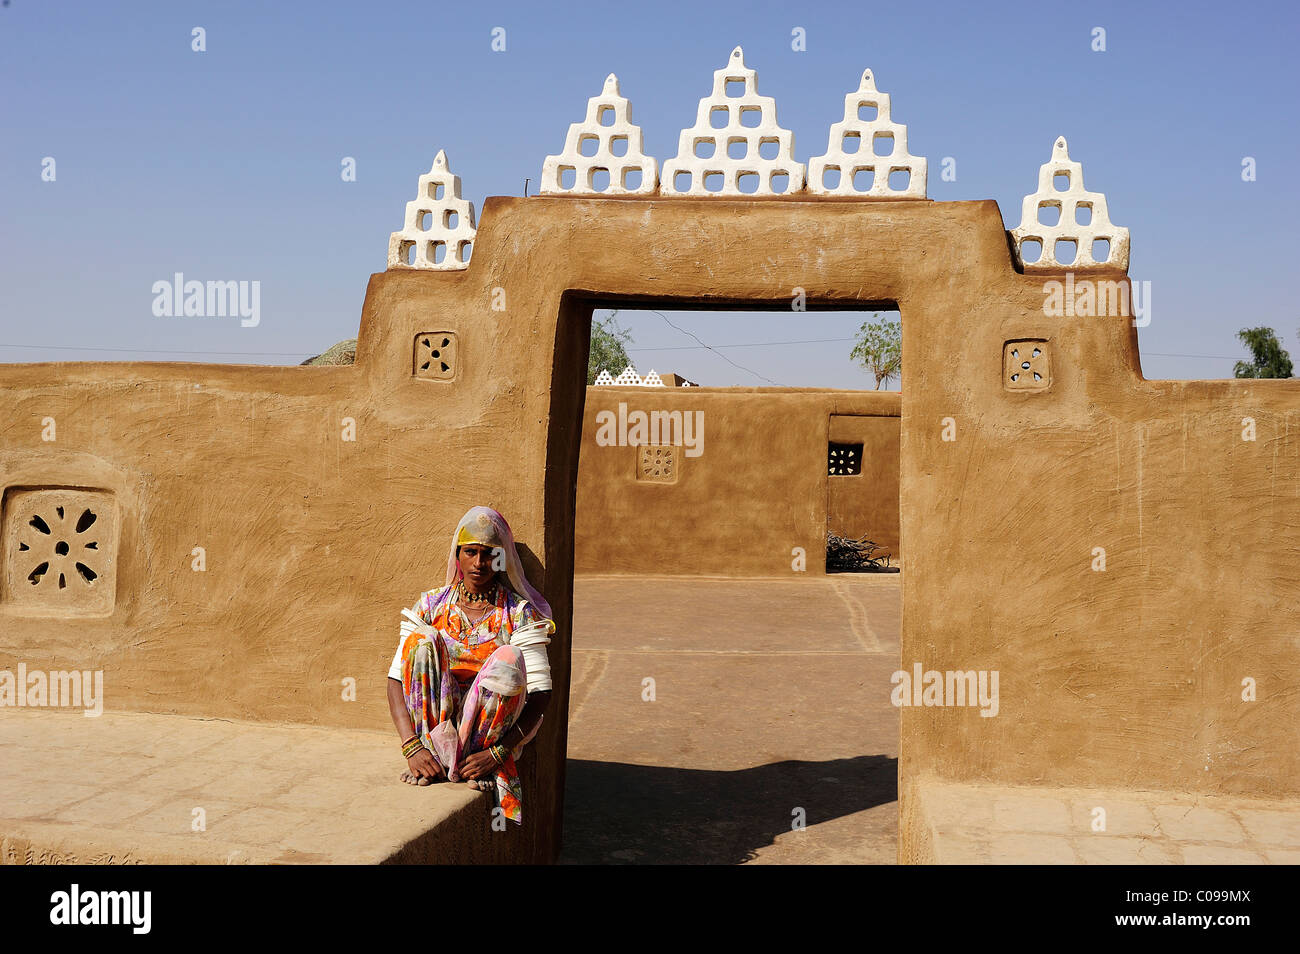 Young woman at the entrance to a courtyard, Thar Desert, Rajasthan, North India, India, Asia Stock Photo